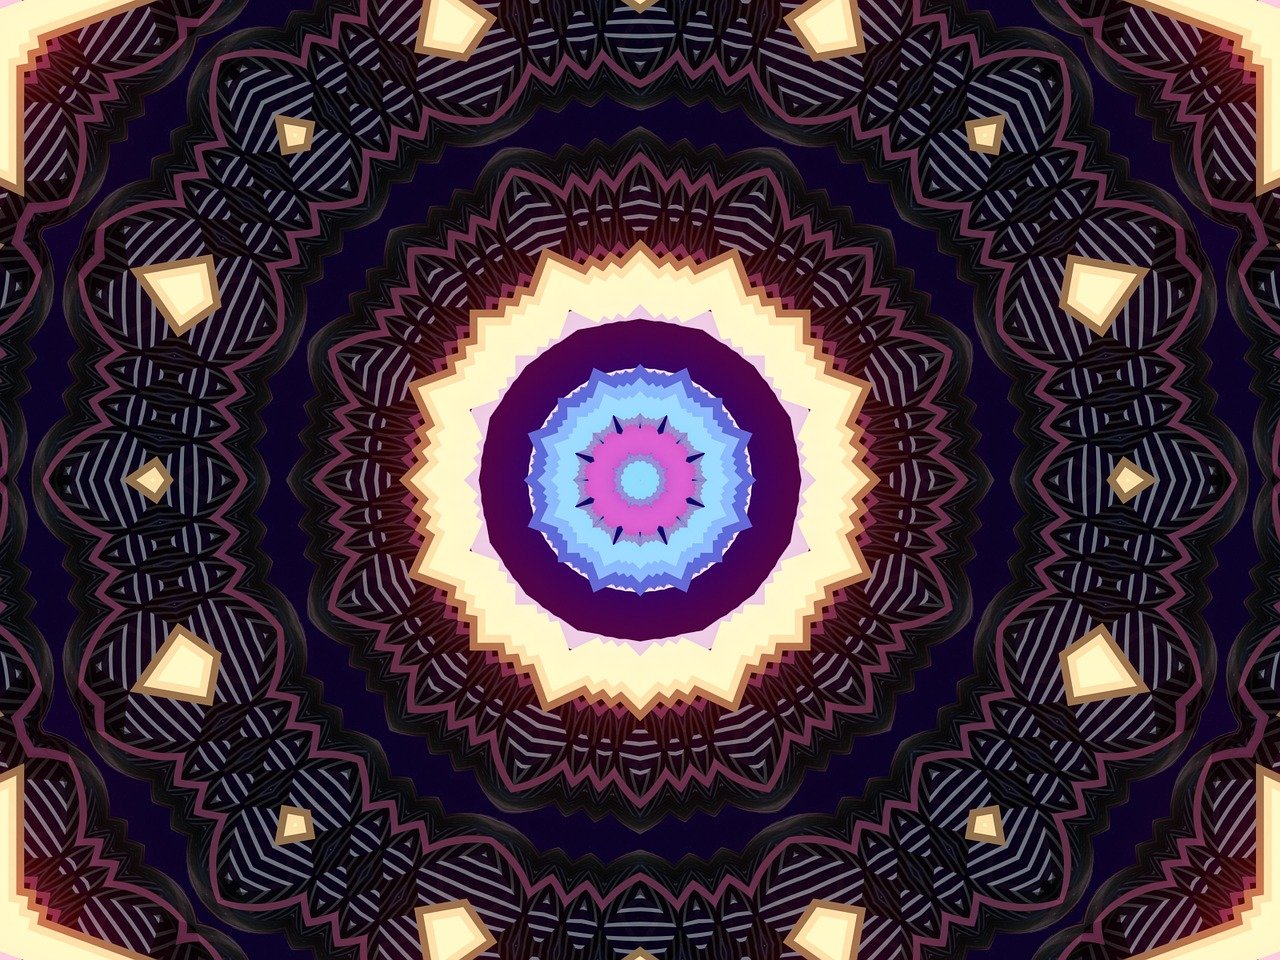 a close up of a circular design on a wall, a mosaic, inspired by Jan Henryk Rosen, flickr, abstract illusionism, fractal tarot card style, purple and blue neon, phone wallpaper. intricate, hypnotic eyes